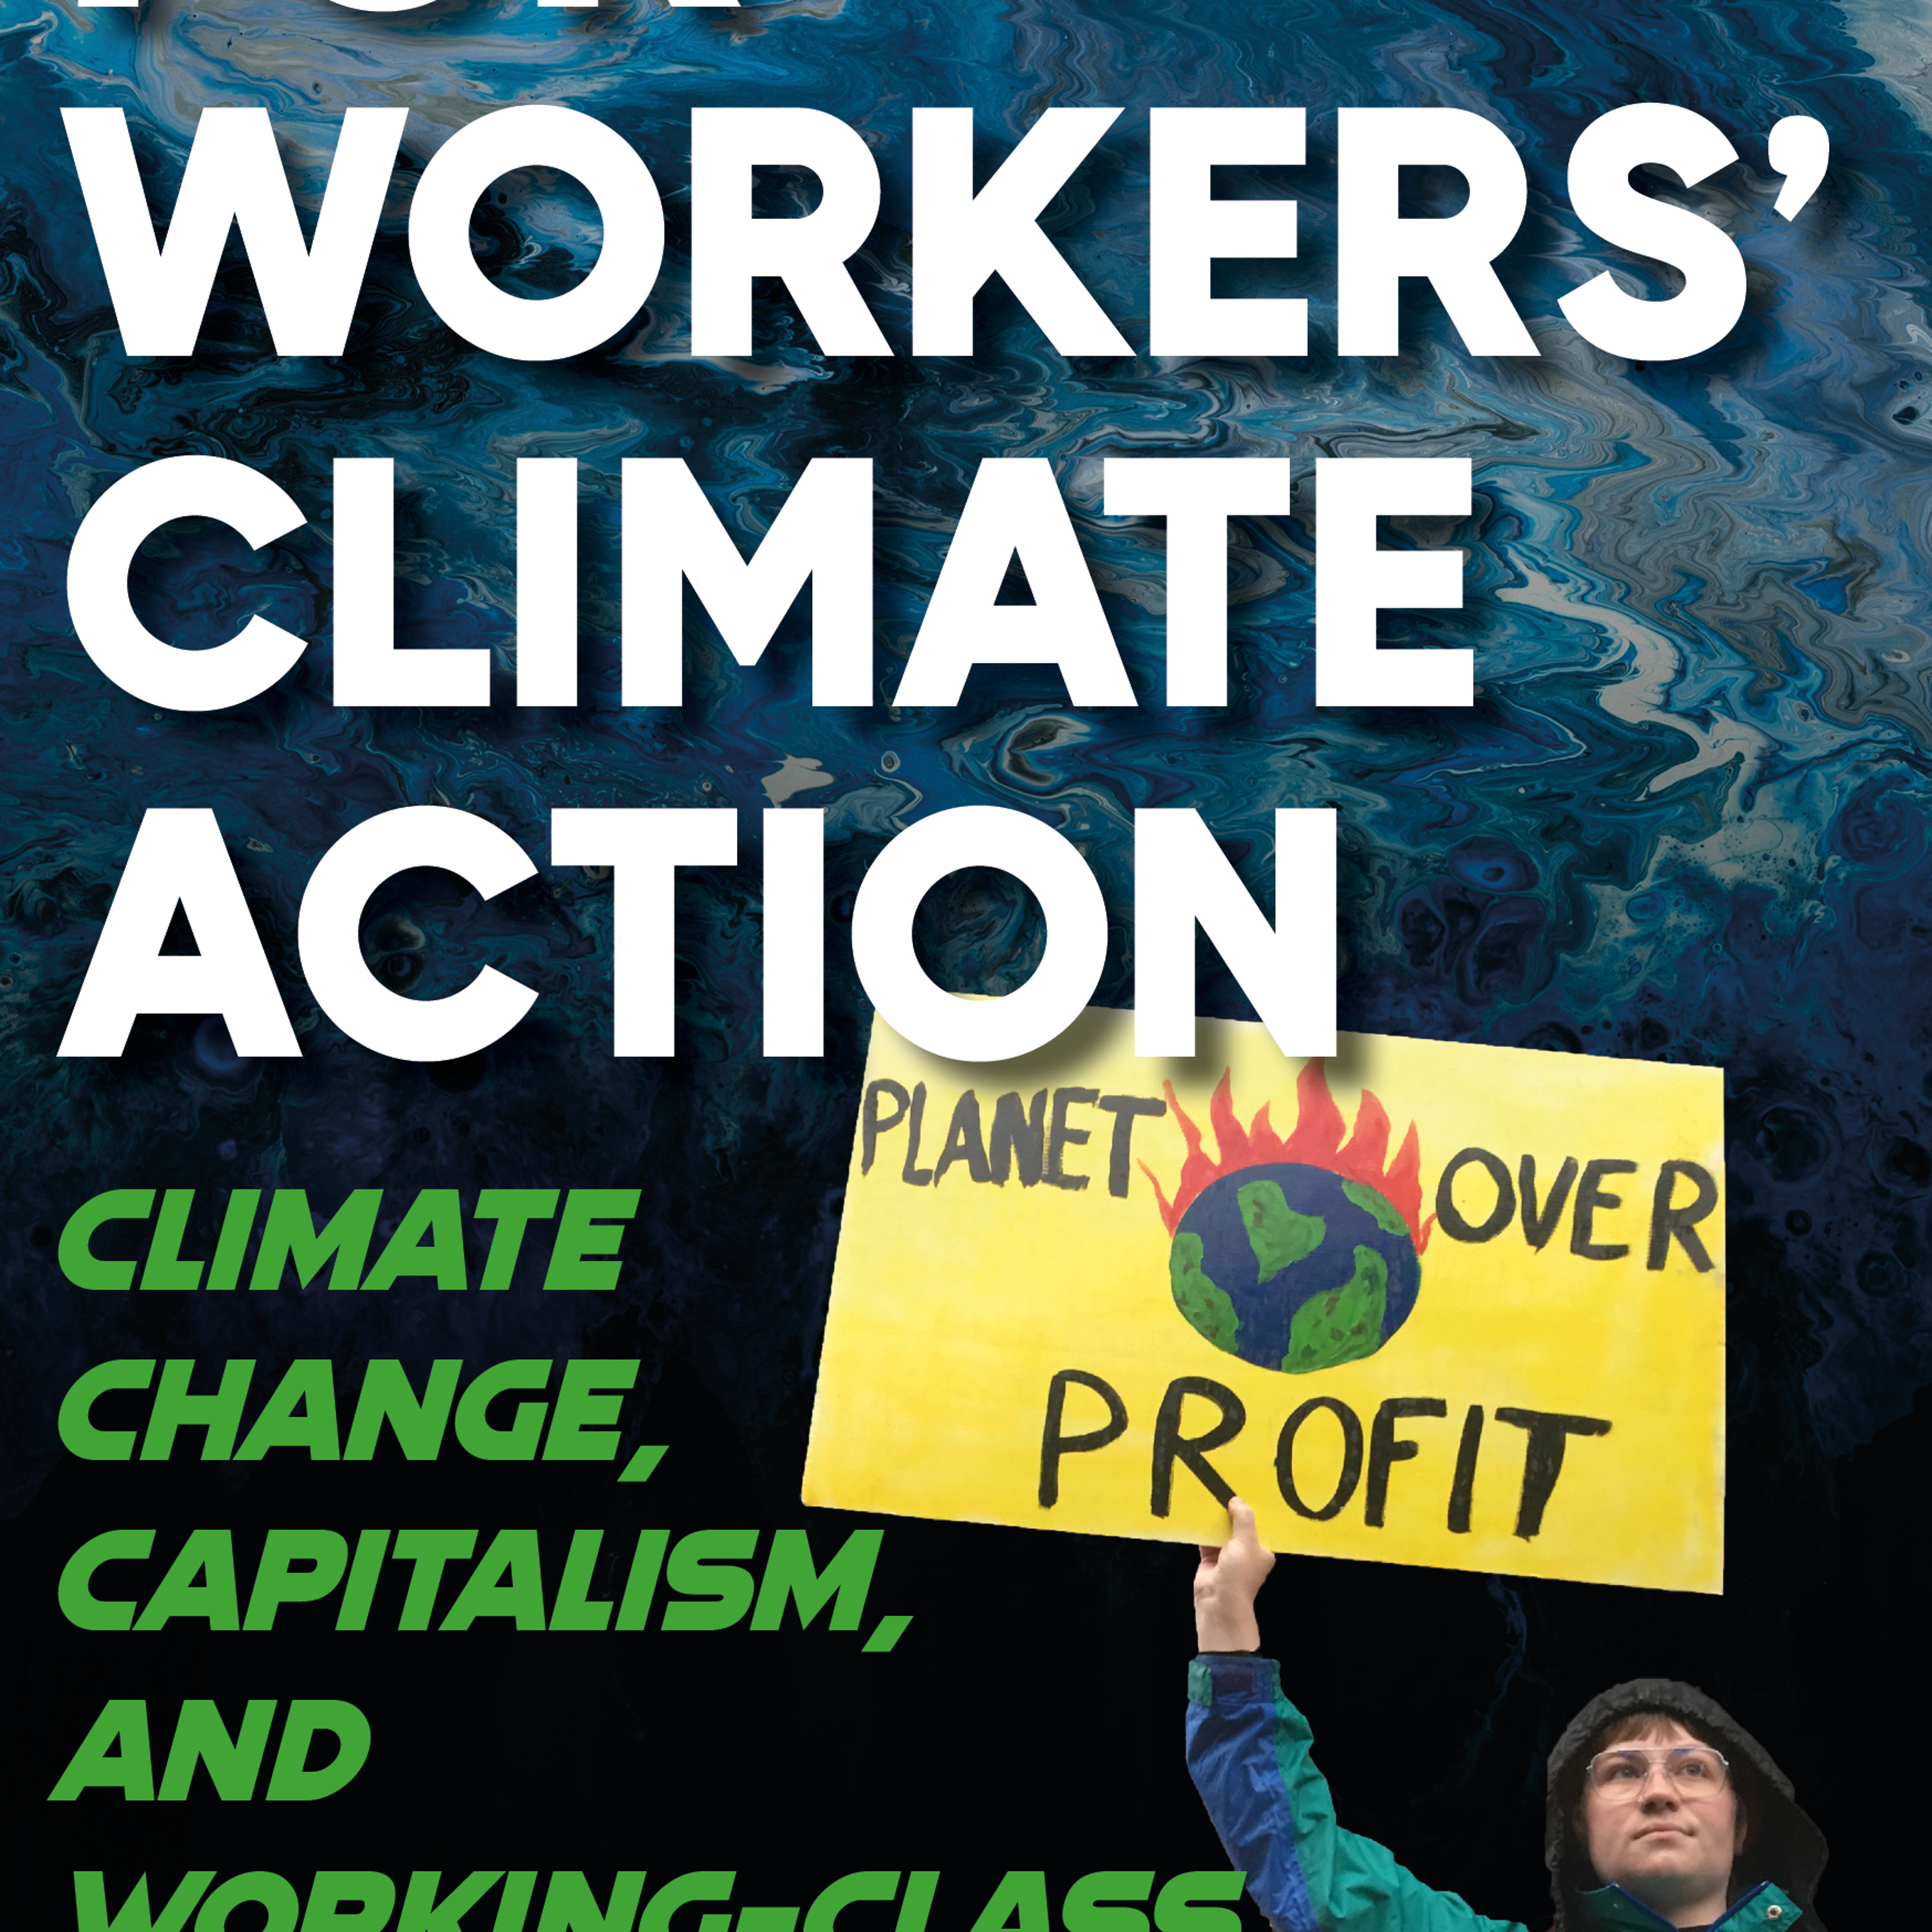 William Morris: ecology and the shift to socialism — Older ed. of For Workers’ Climate Action